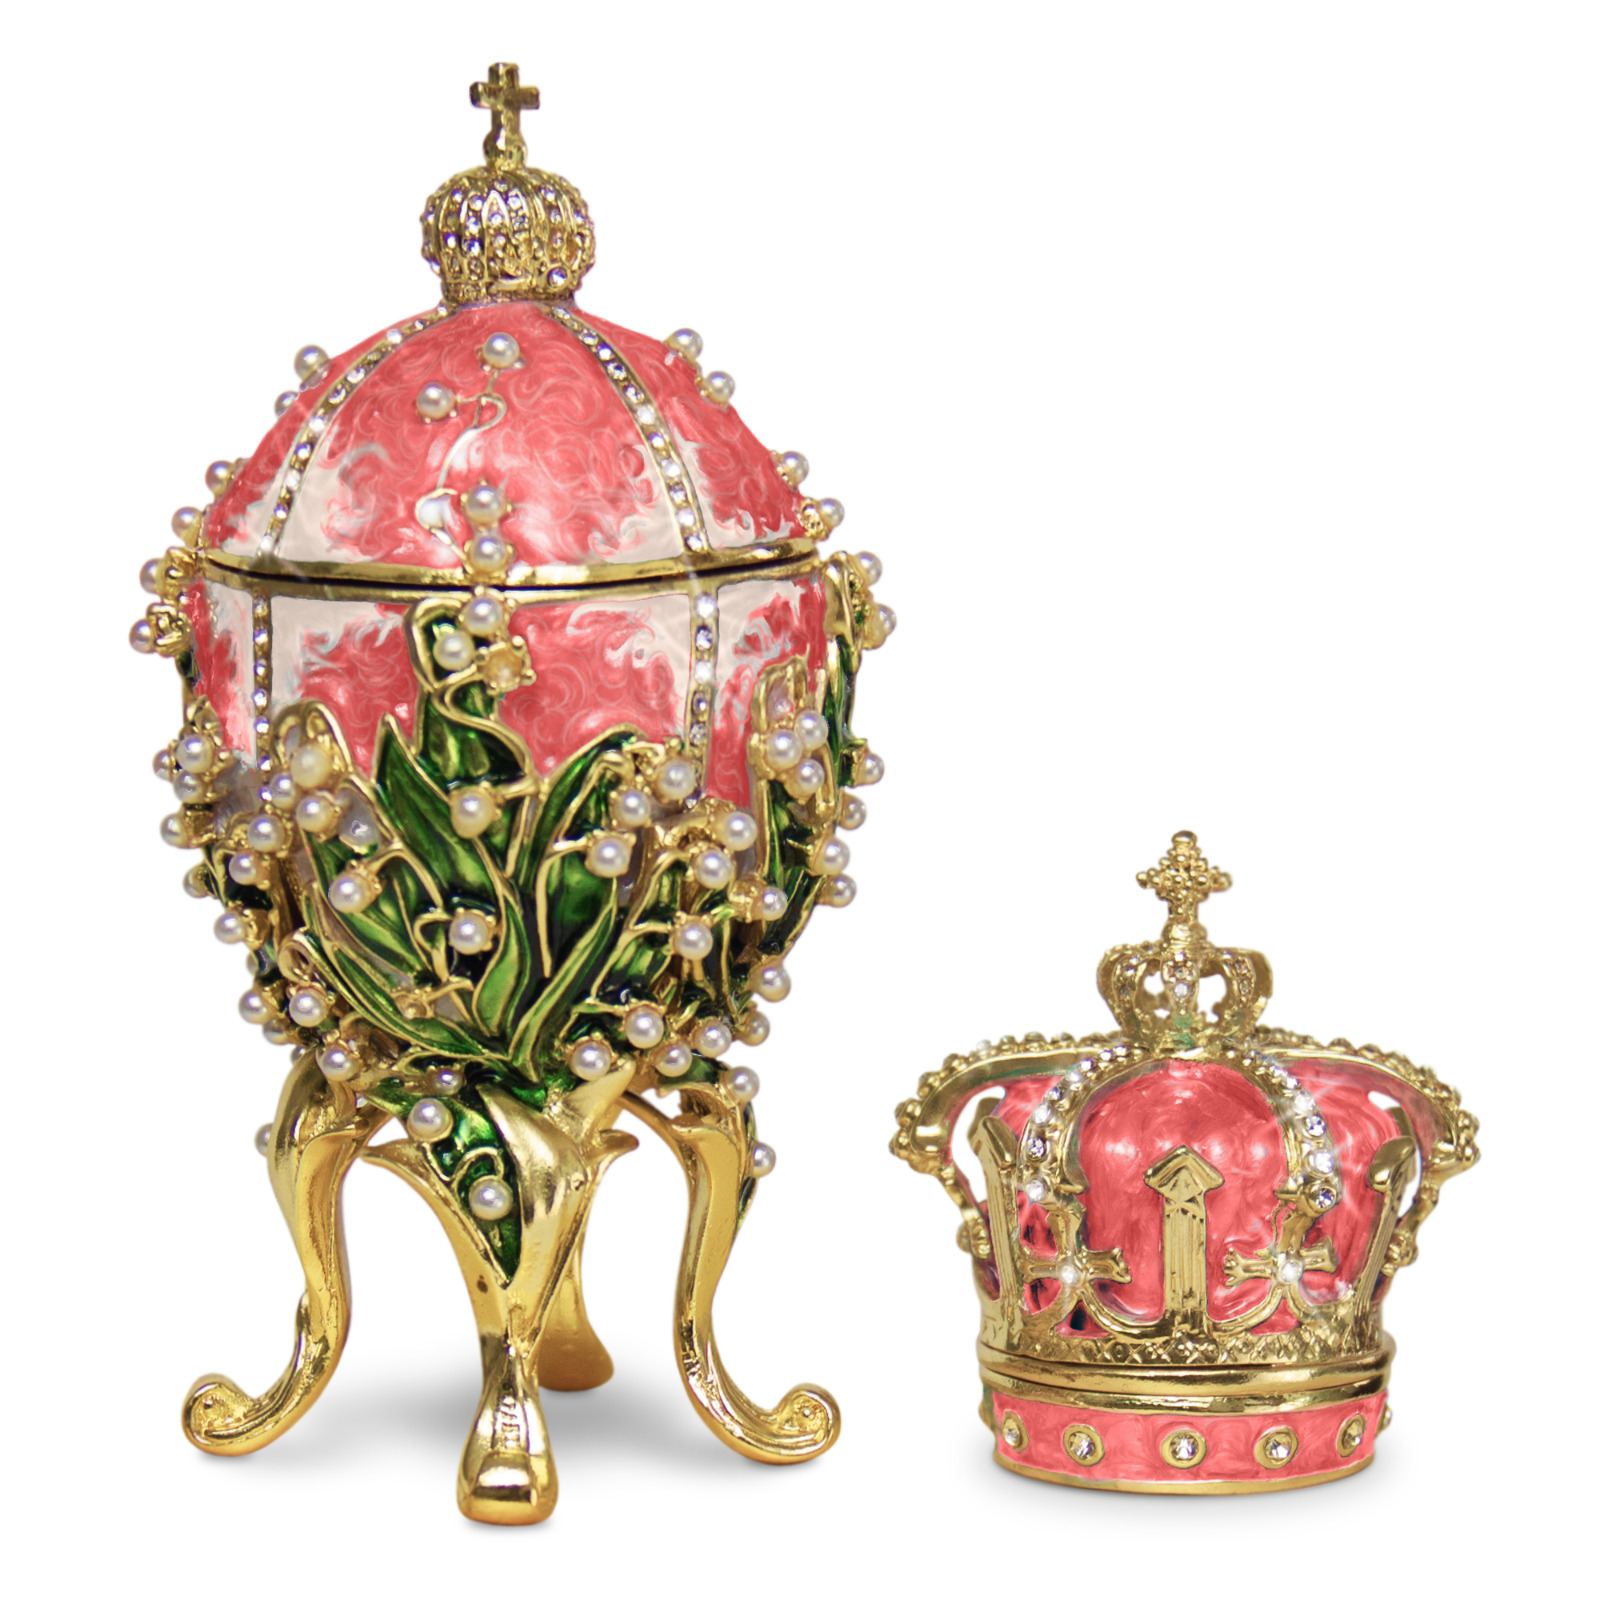 Pink Lilies of the Valley Faberge Egg Replica Extra Large 5.9 inch + Crown